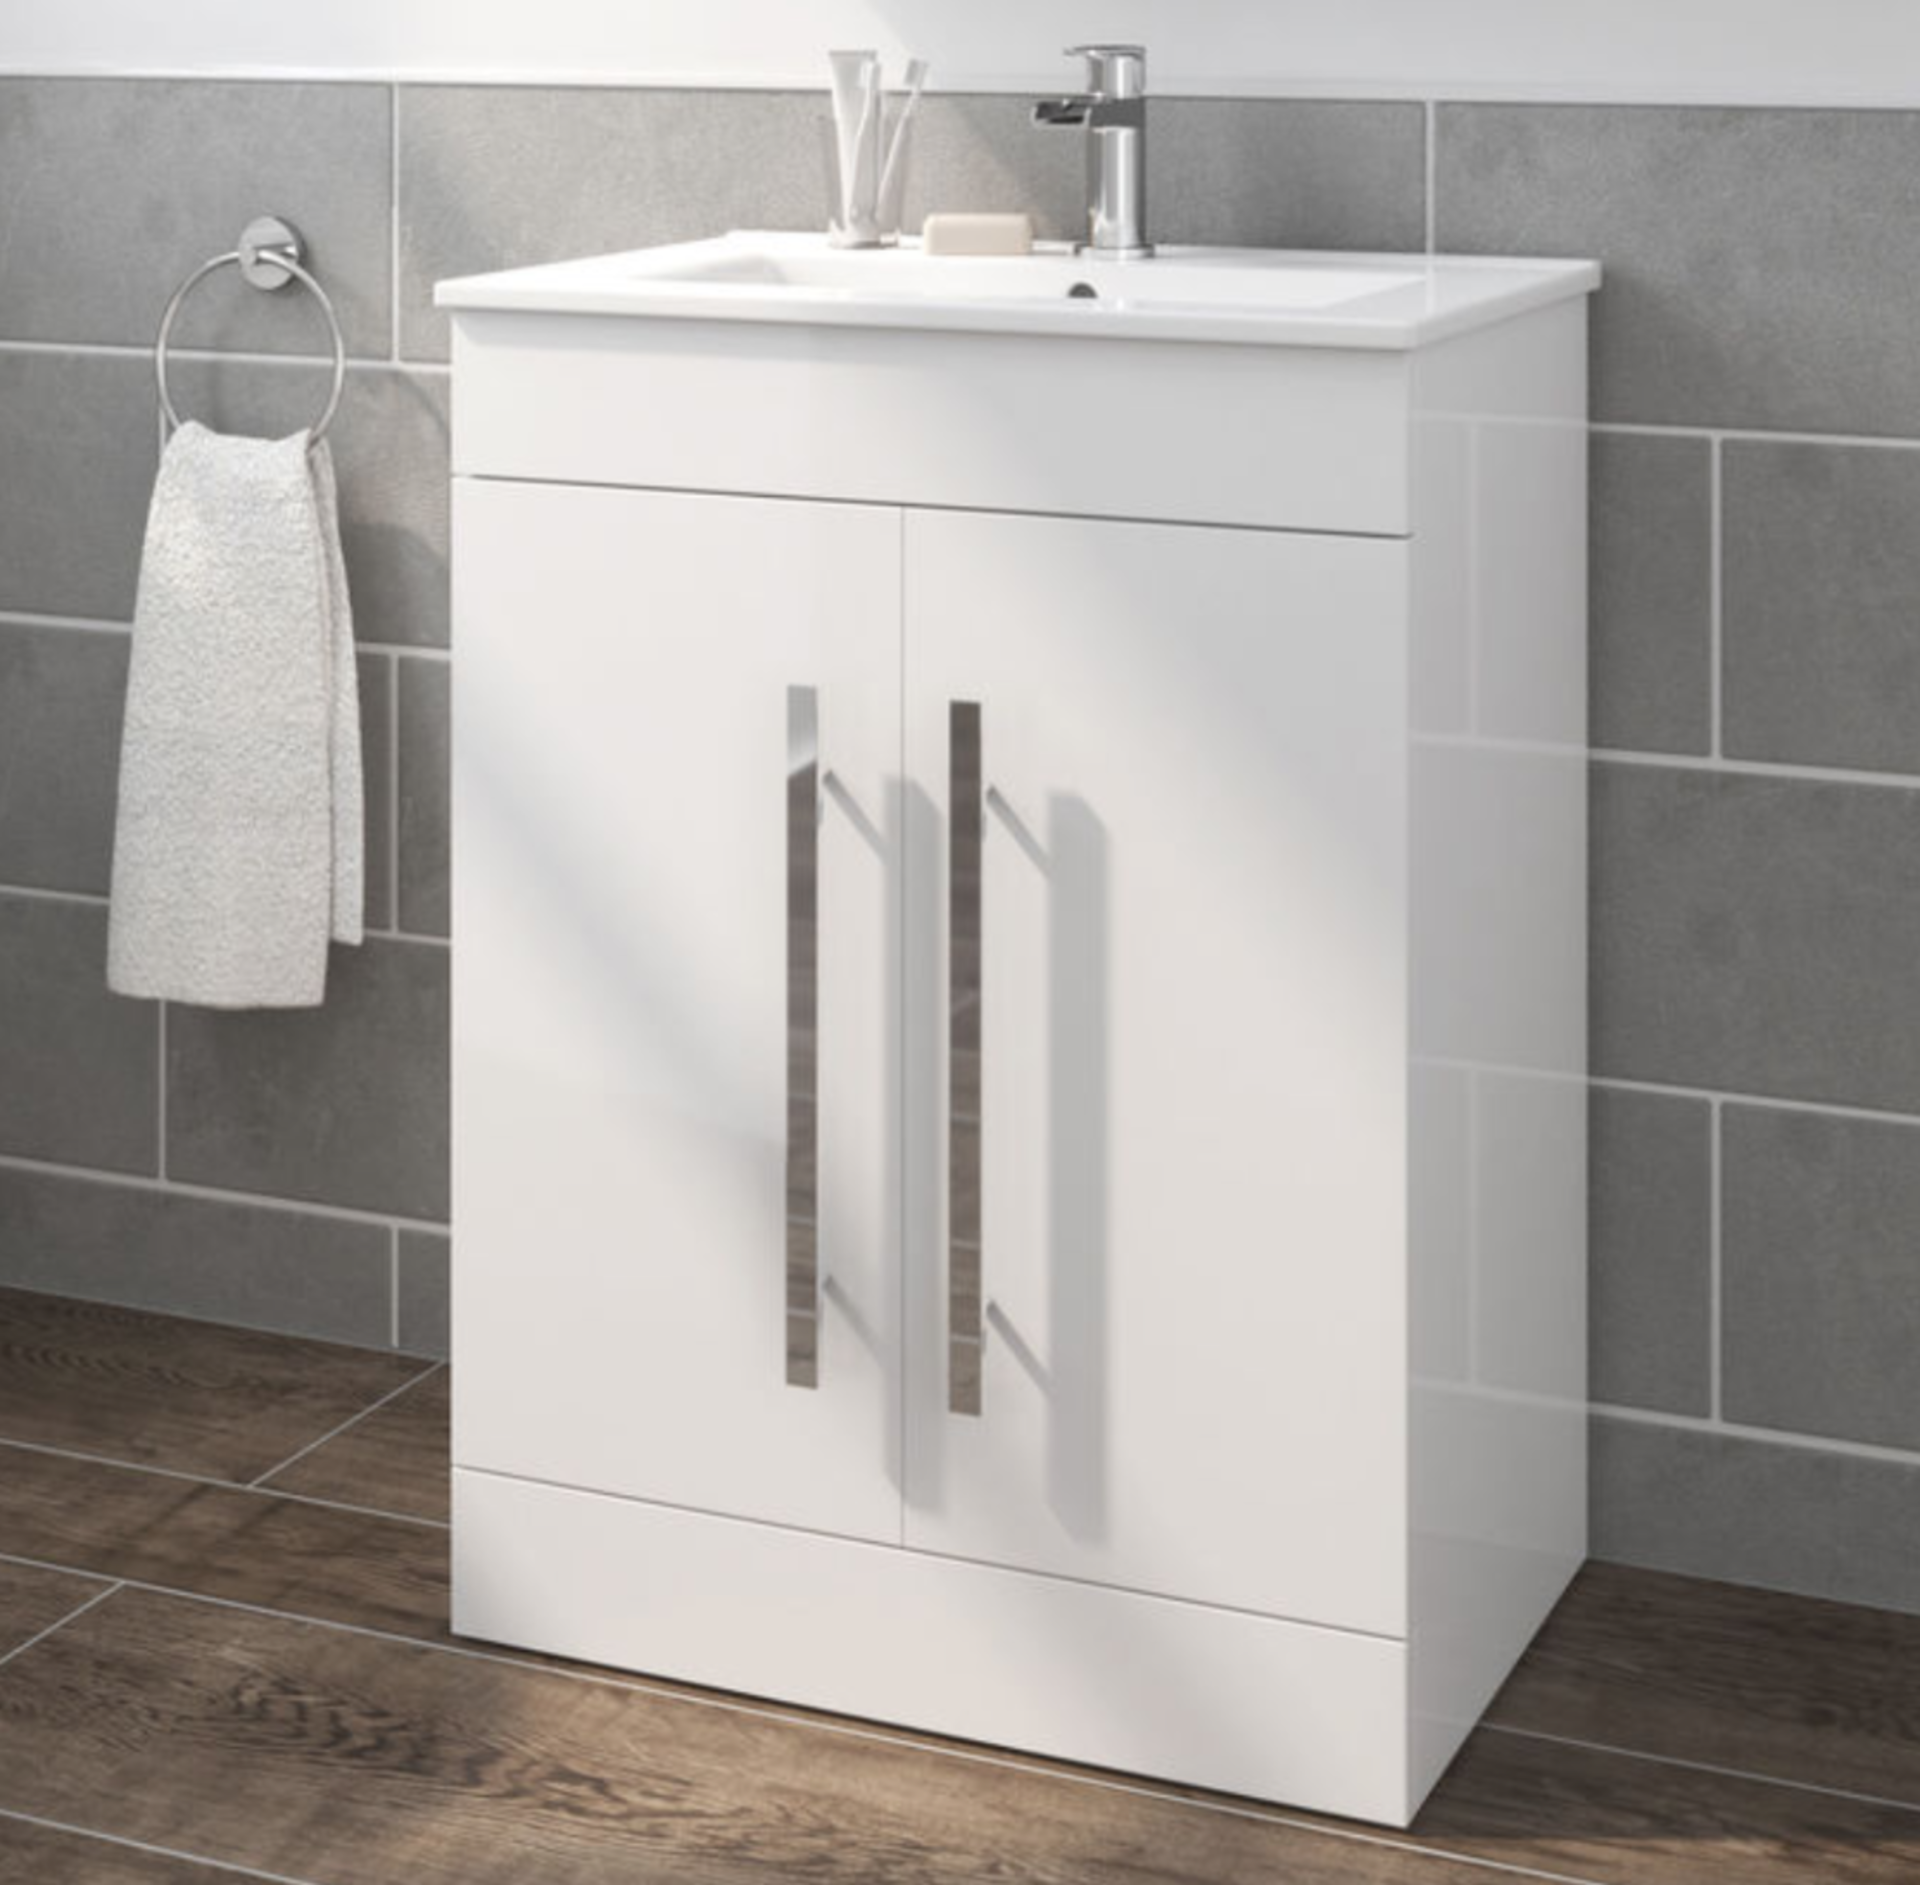 New Boxed 600mm Trent Gloss White Sink Cabinet - Floor Standing. RRP £499.99.Comes Complete W...